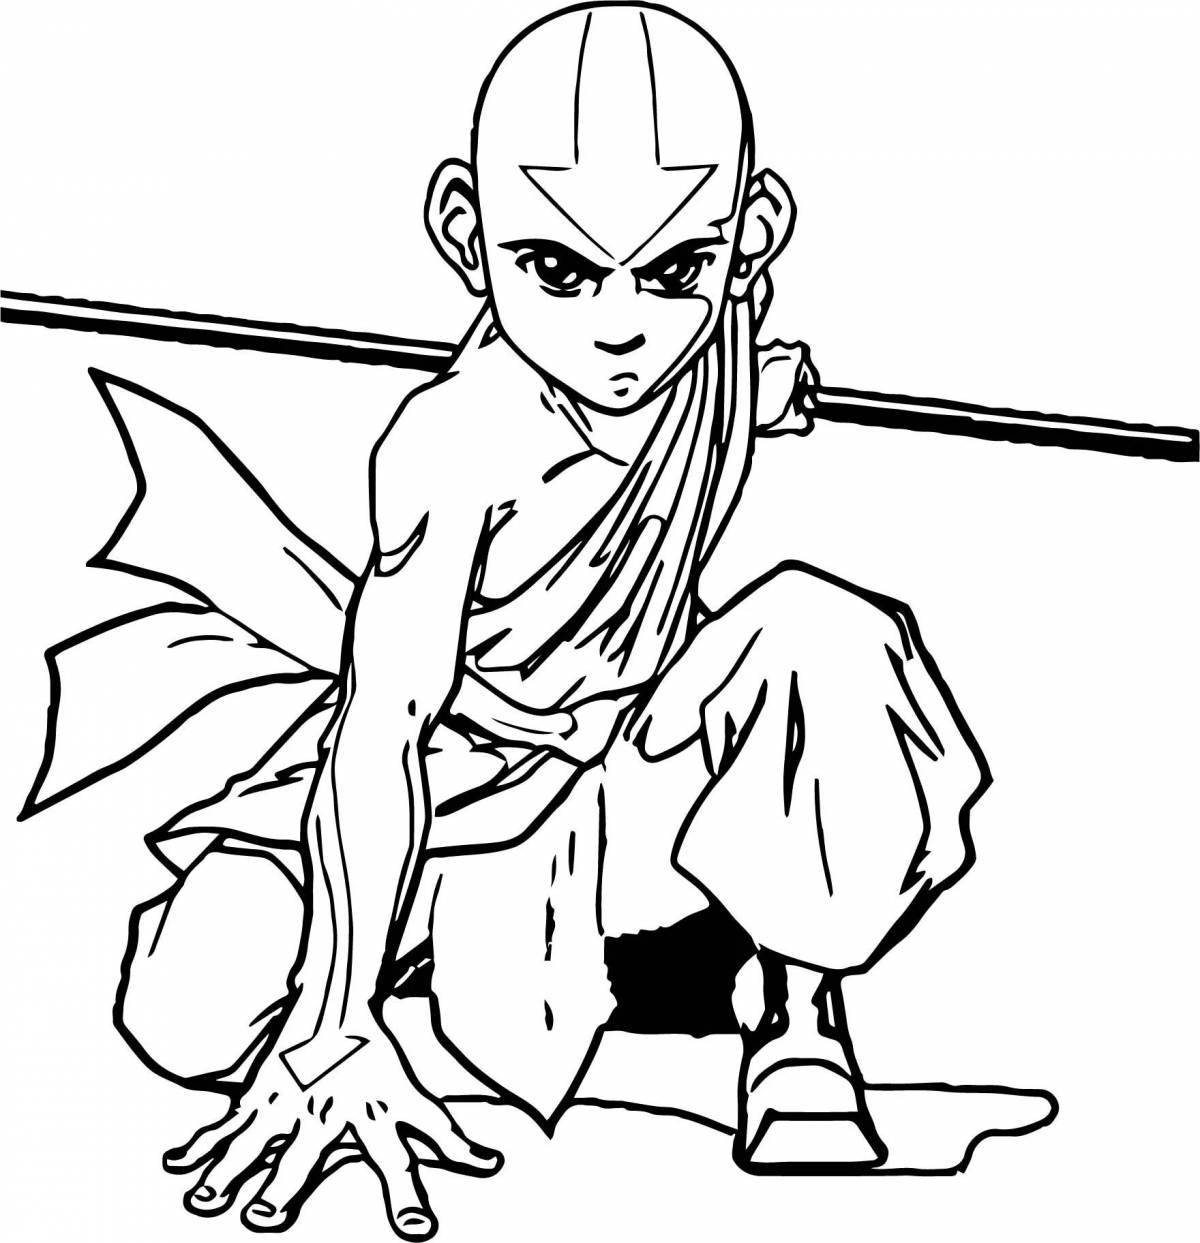 Coloring avatar lively aang